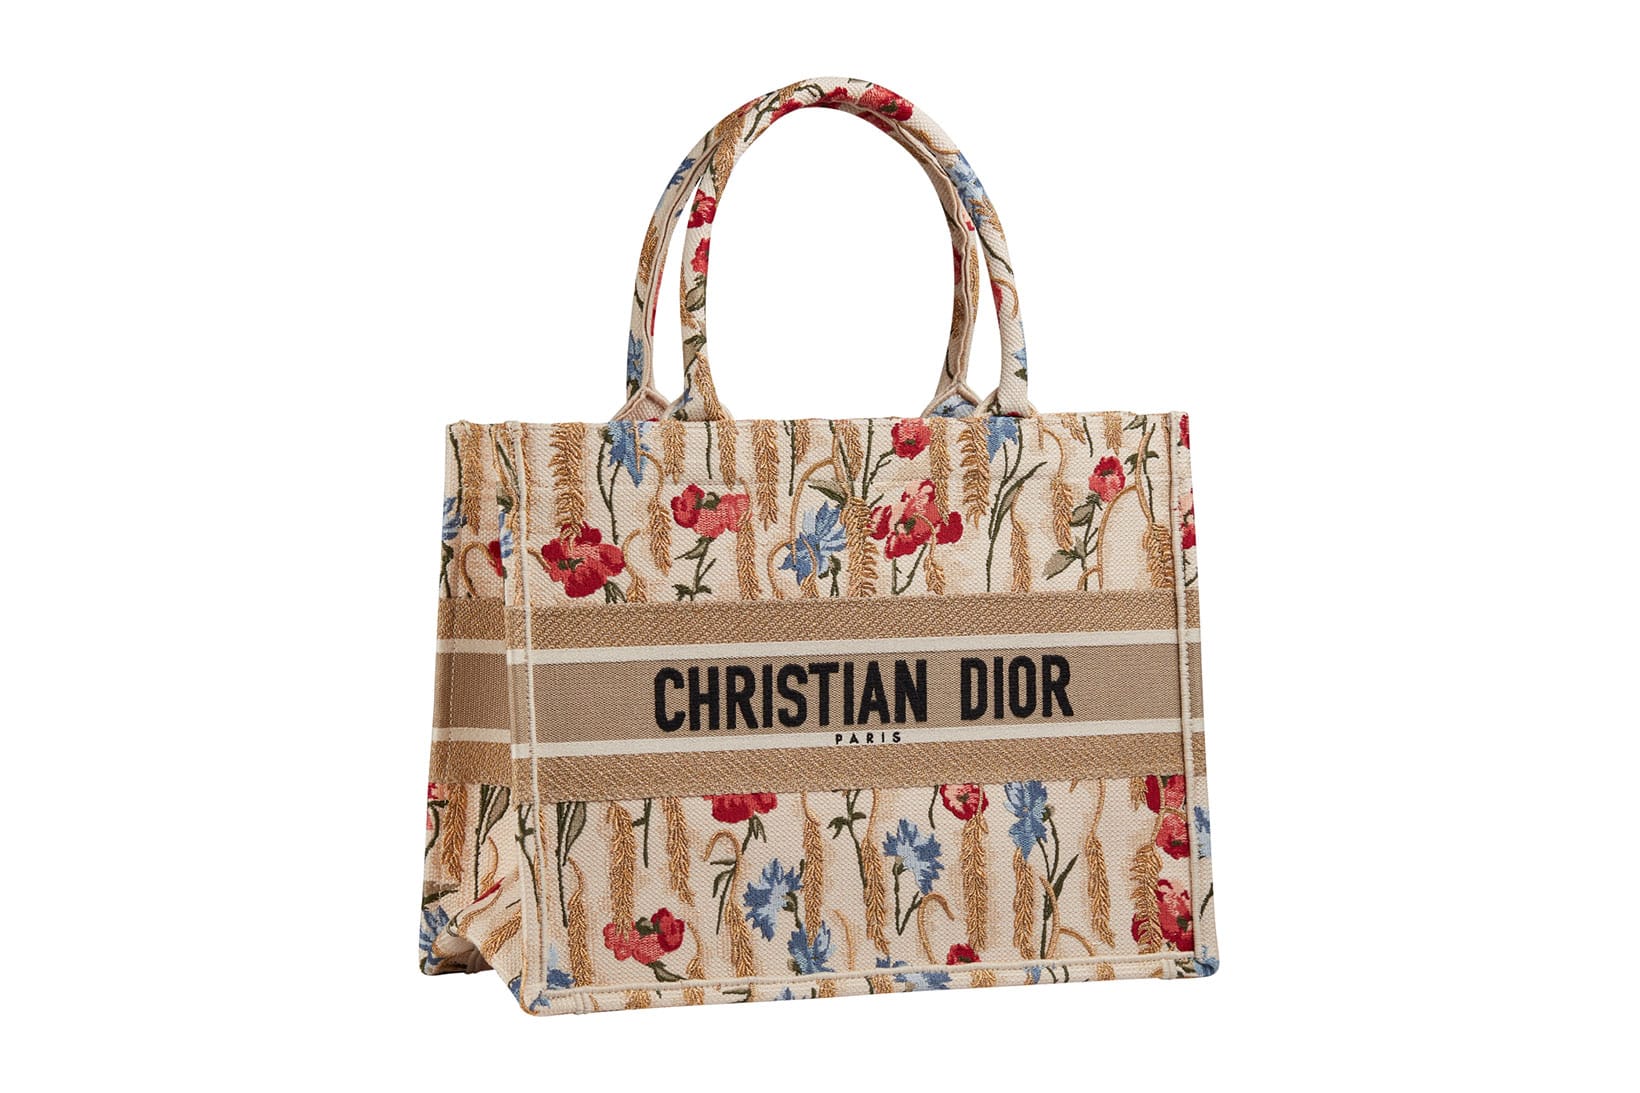 Dior Tote Floral Pattern Bag Best Price In Pakistan  Rs 7500  find the  best quality of Handbagshand Bag Hand Bags Ladies Bags Side Bags  Clutches Leather Bags Purse Fashion Bags